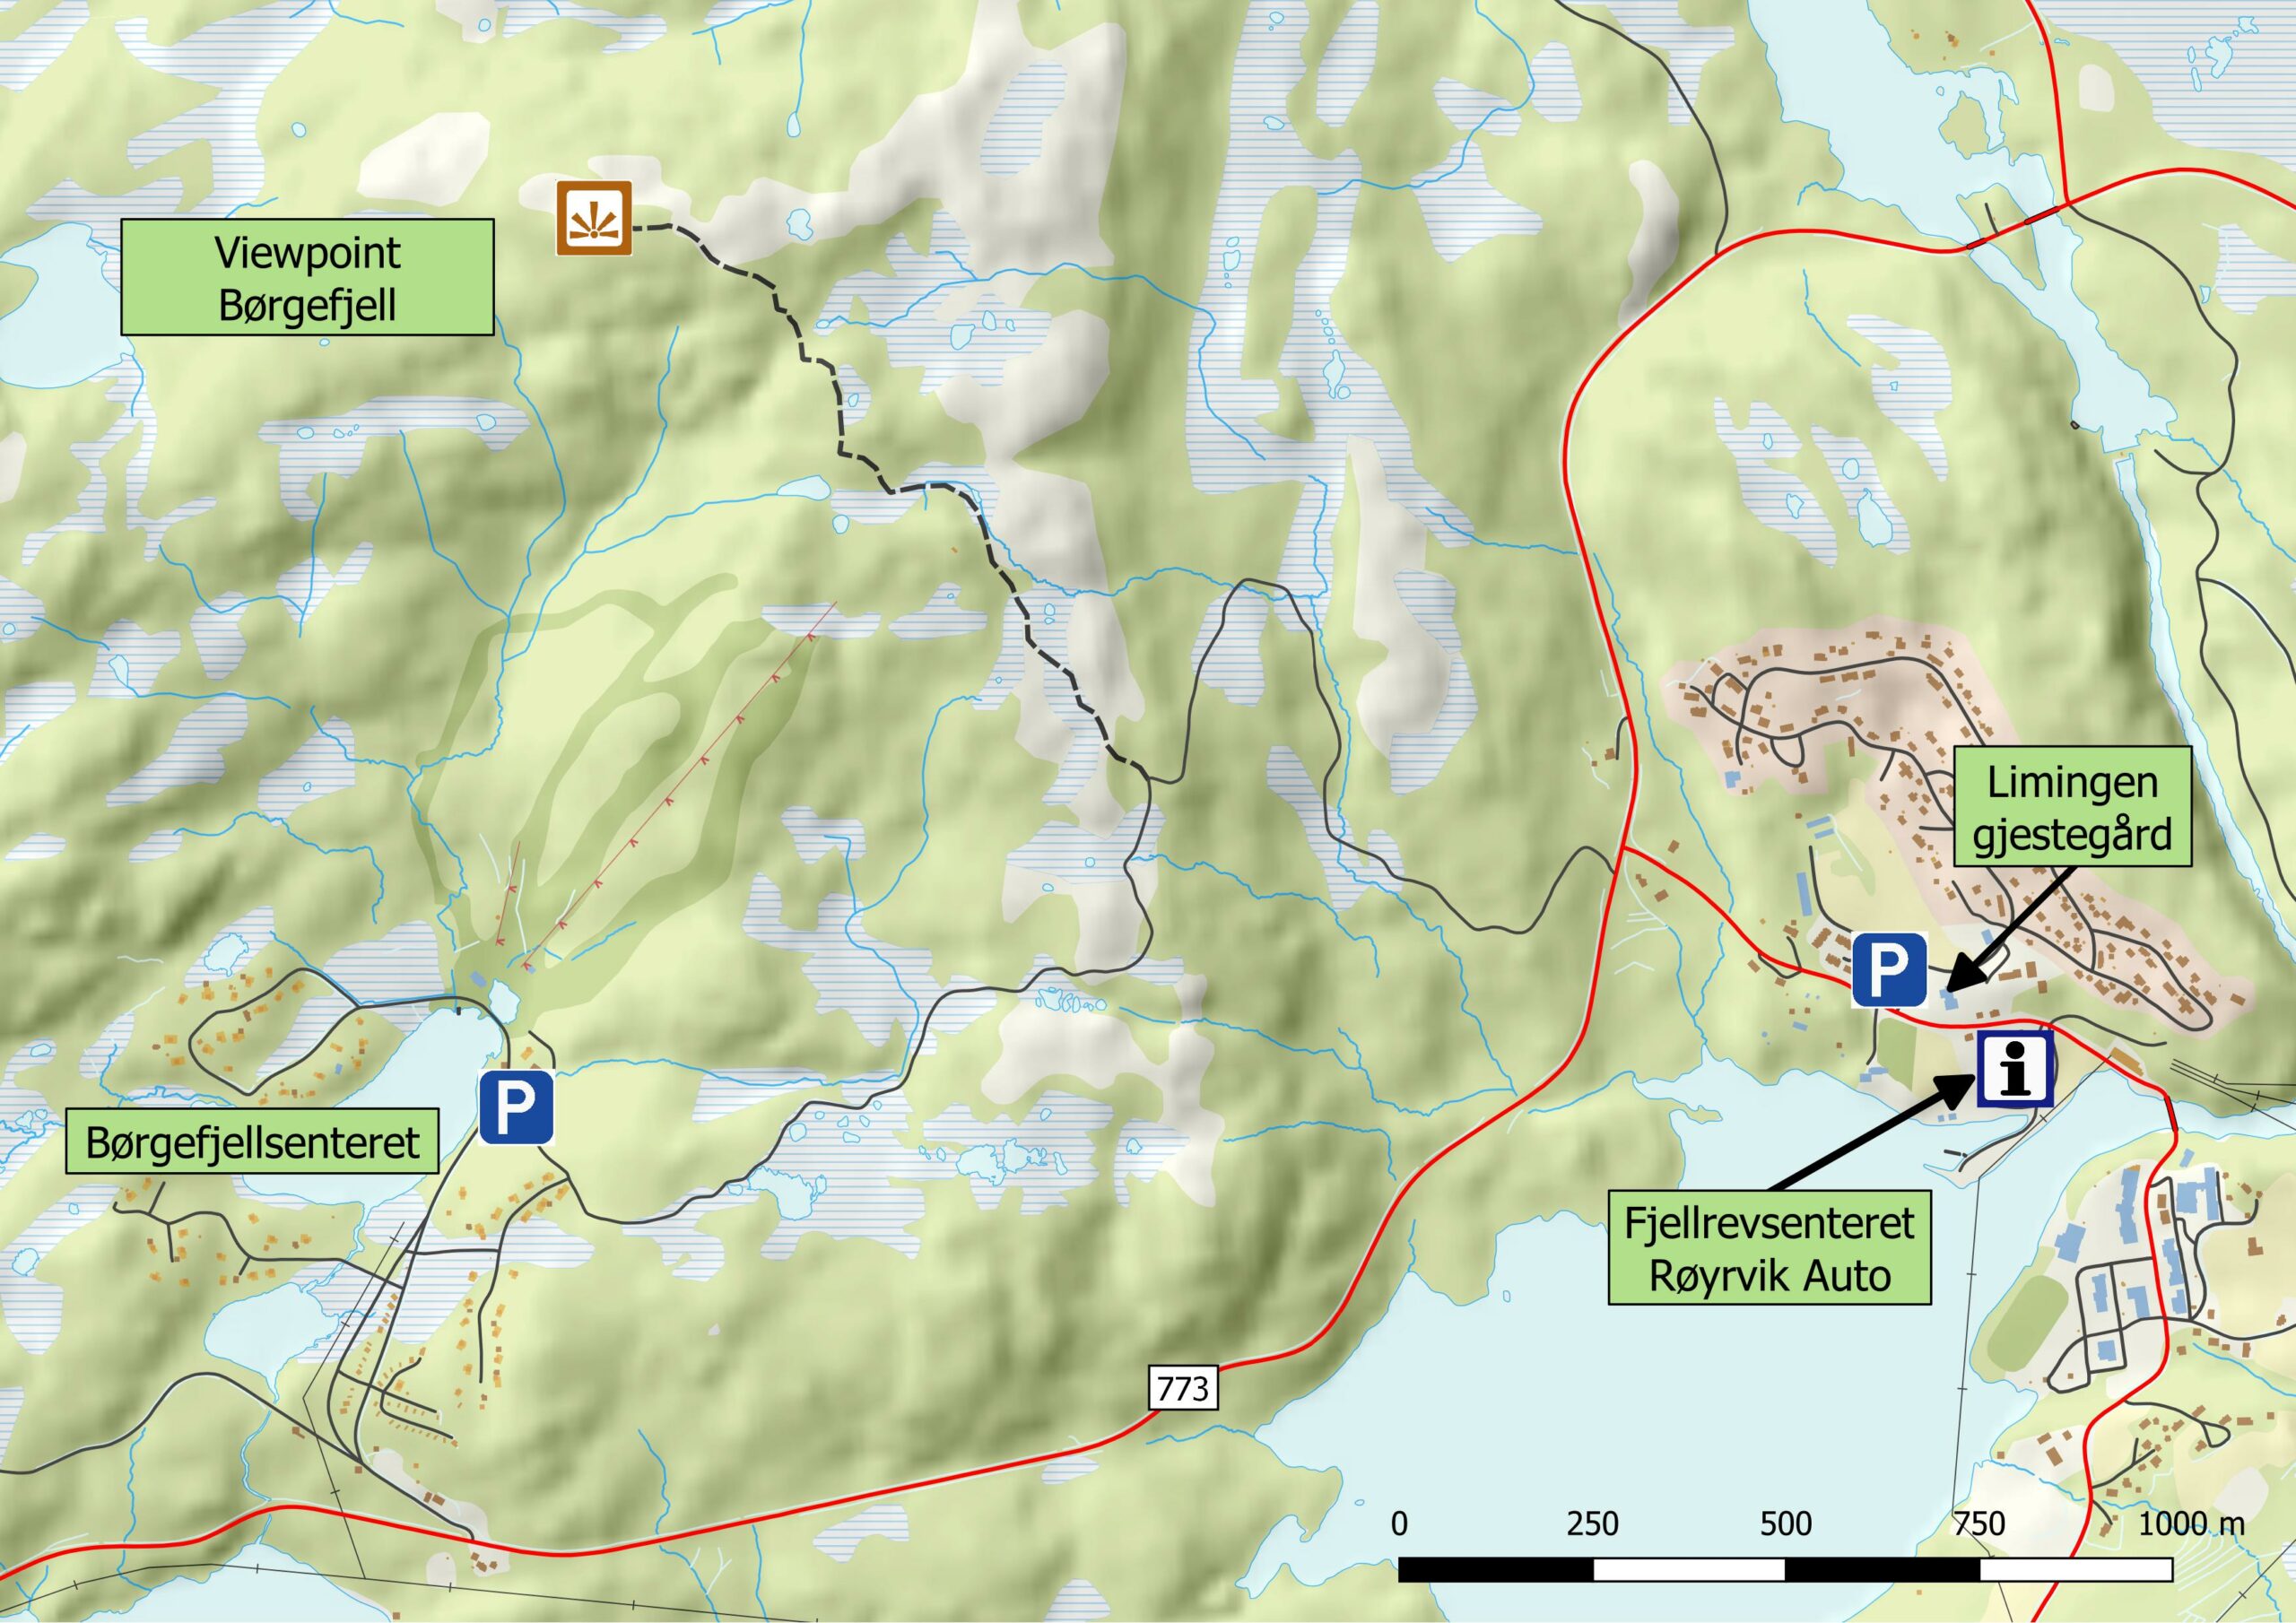 Map showing the trip to Viewpoint Børgefjell